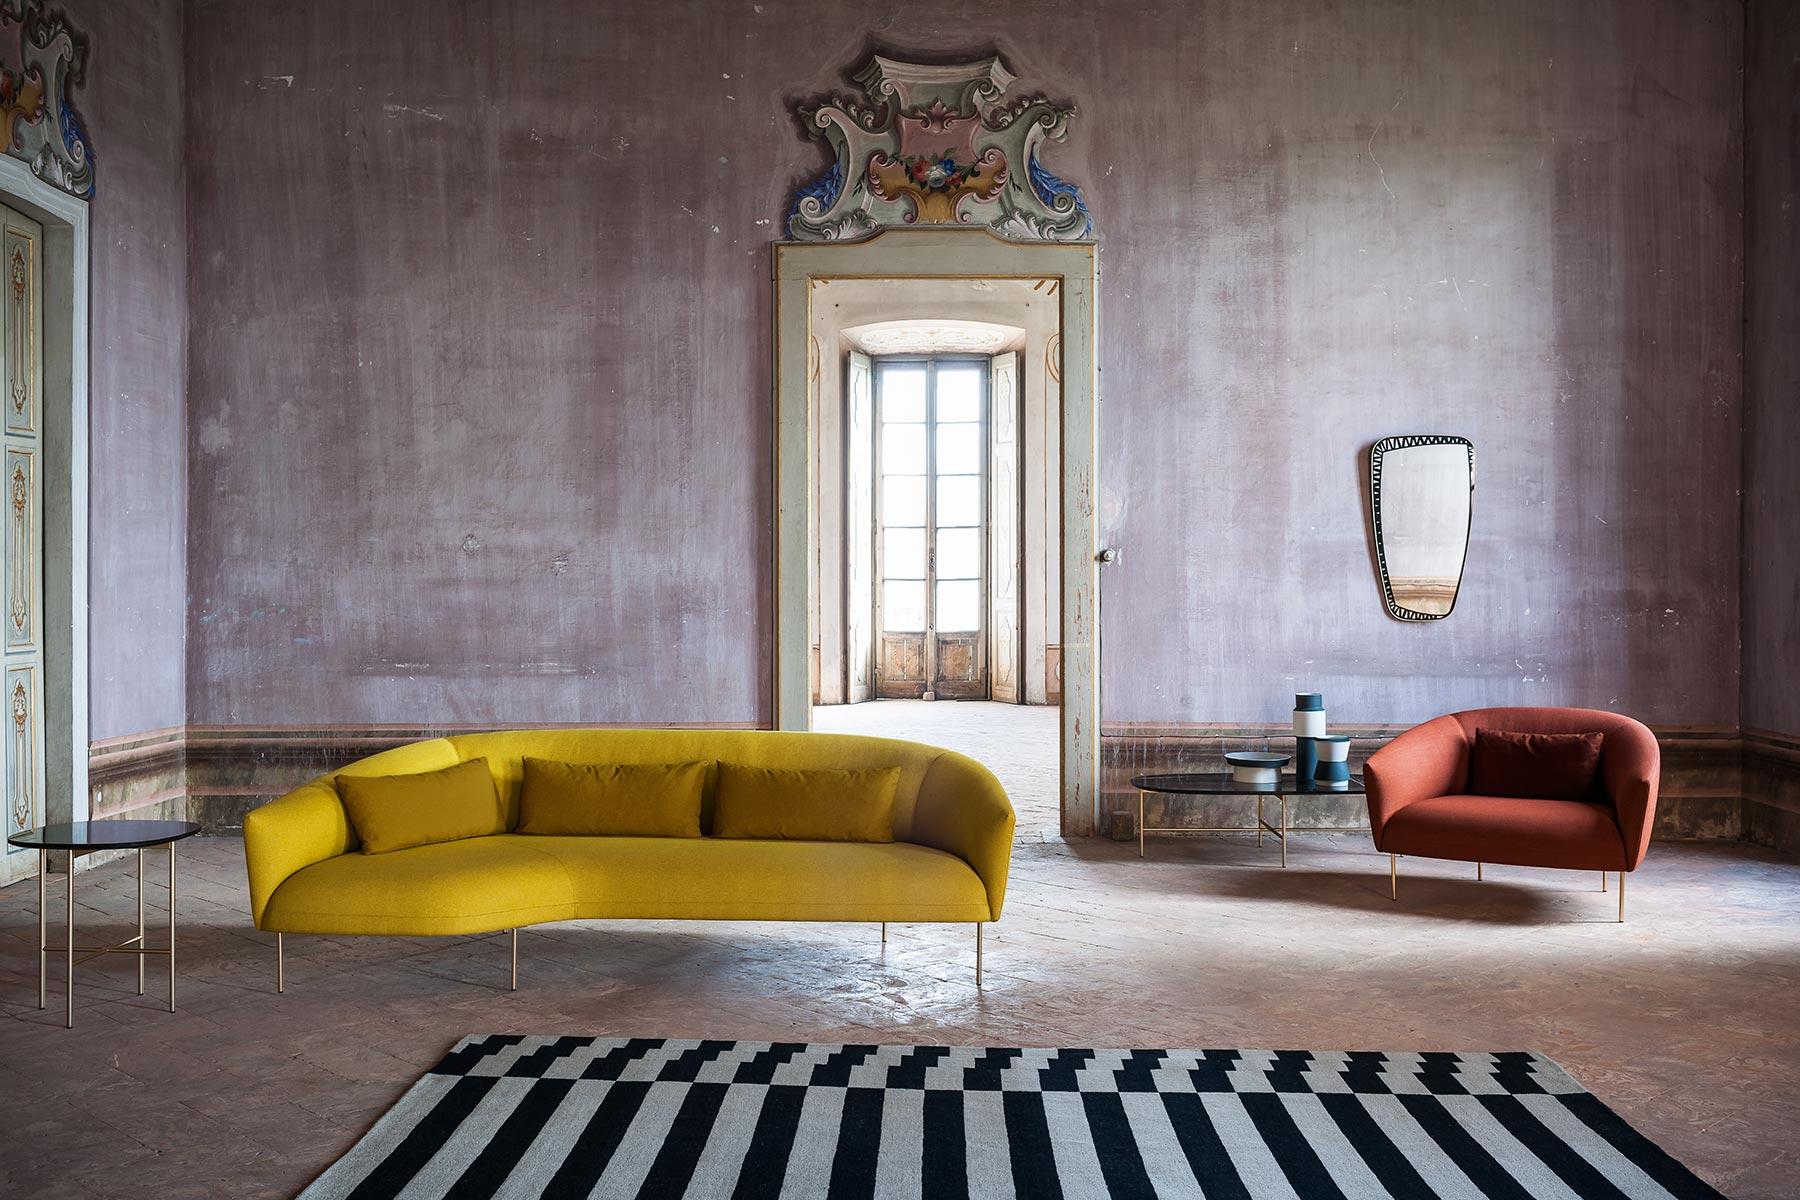 Almost suspended above the floor, with the slenderest of legs upholding a large, cosy seat. Jonas Wagell imagines a family of sofas, inspired by the soft, curving form of a semicircle: this little collection, from armchair to sofa to chaise longue,